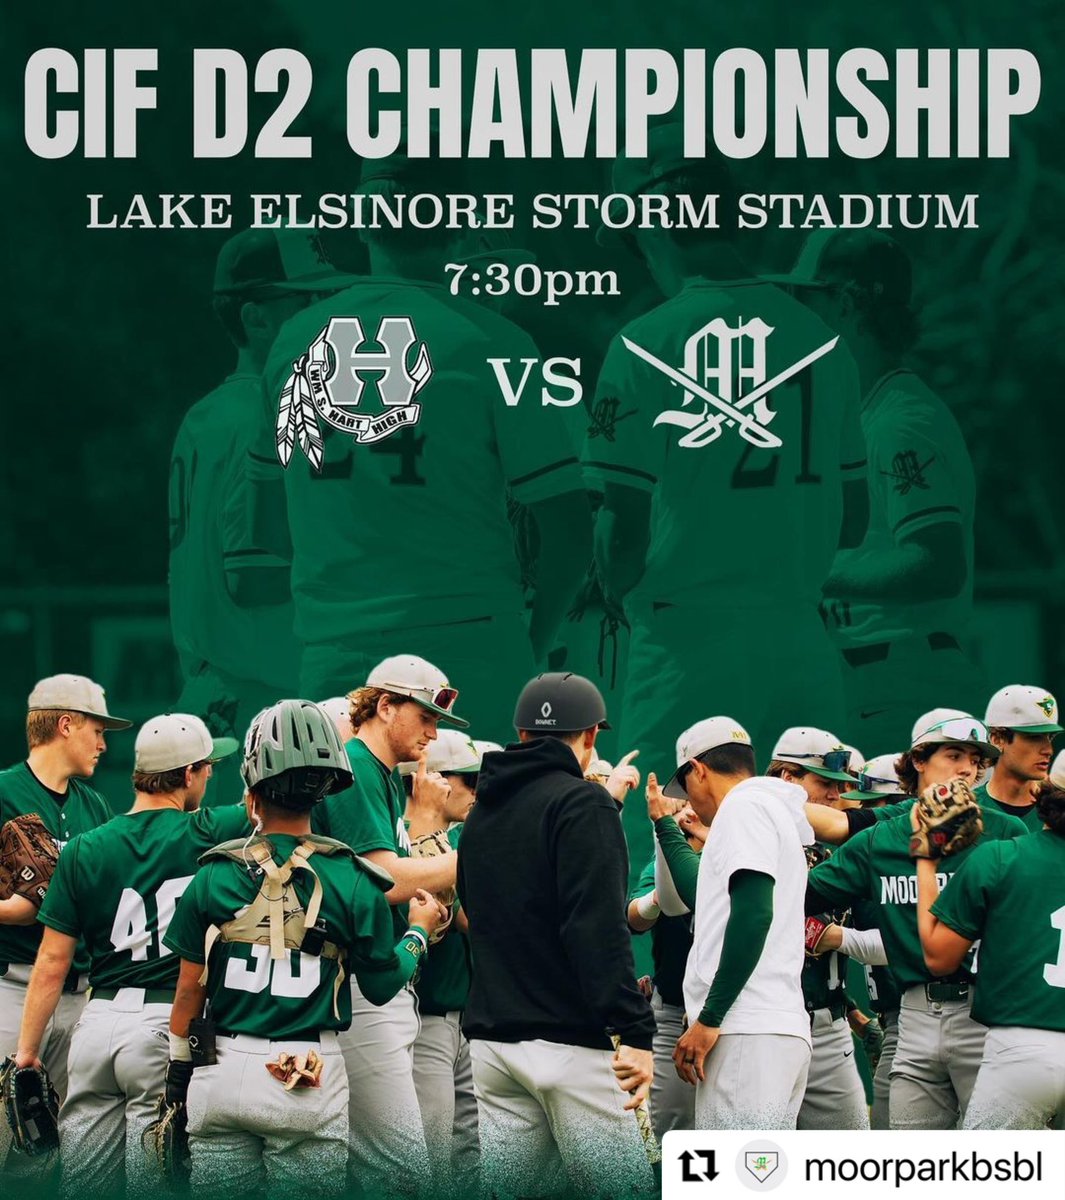 #Repost @moorparkbsbl 
・・・
It’s GAMEDAY!

For the first time in school history, the Musketeers travel to Lake Elsinore Storm Stadium this evening to play for the CIF Southern Section Division 2 Championship. #Moorpark